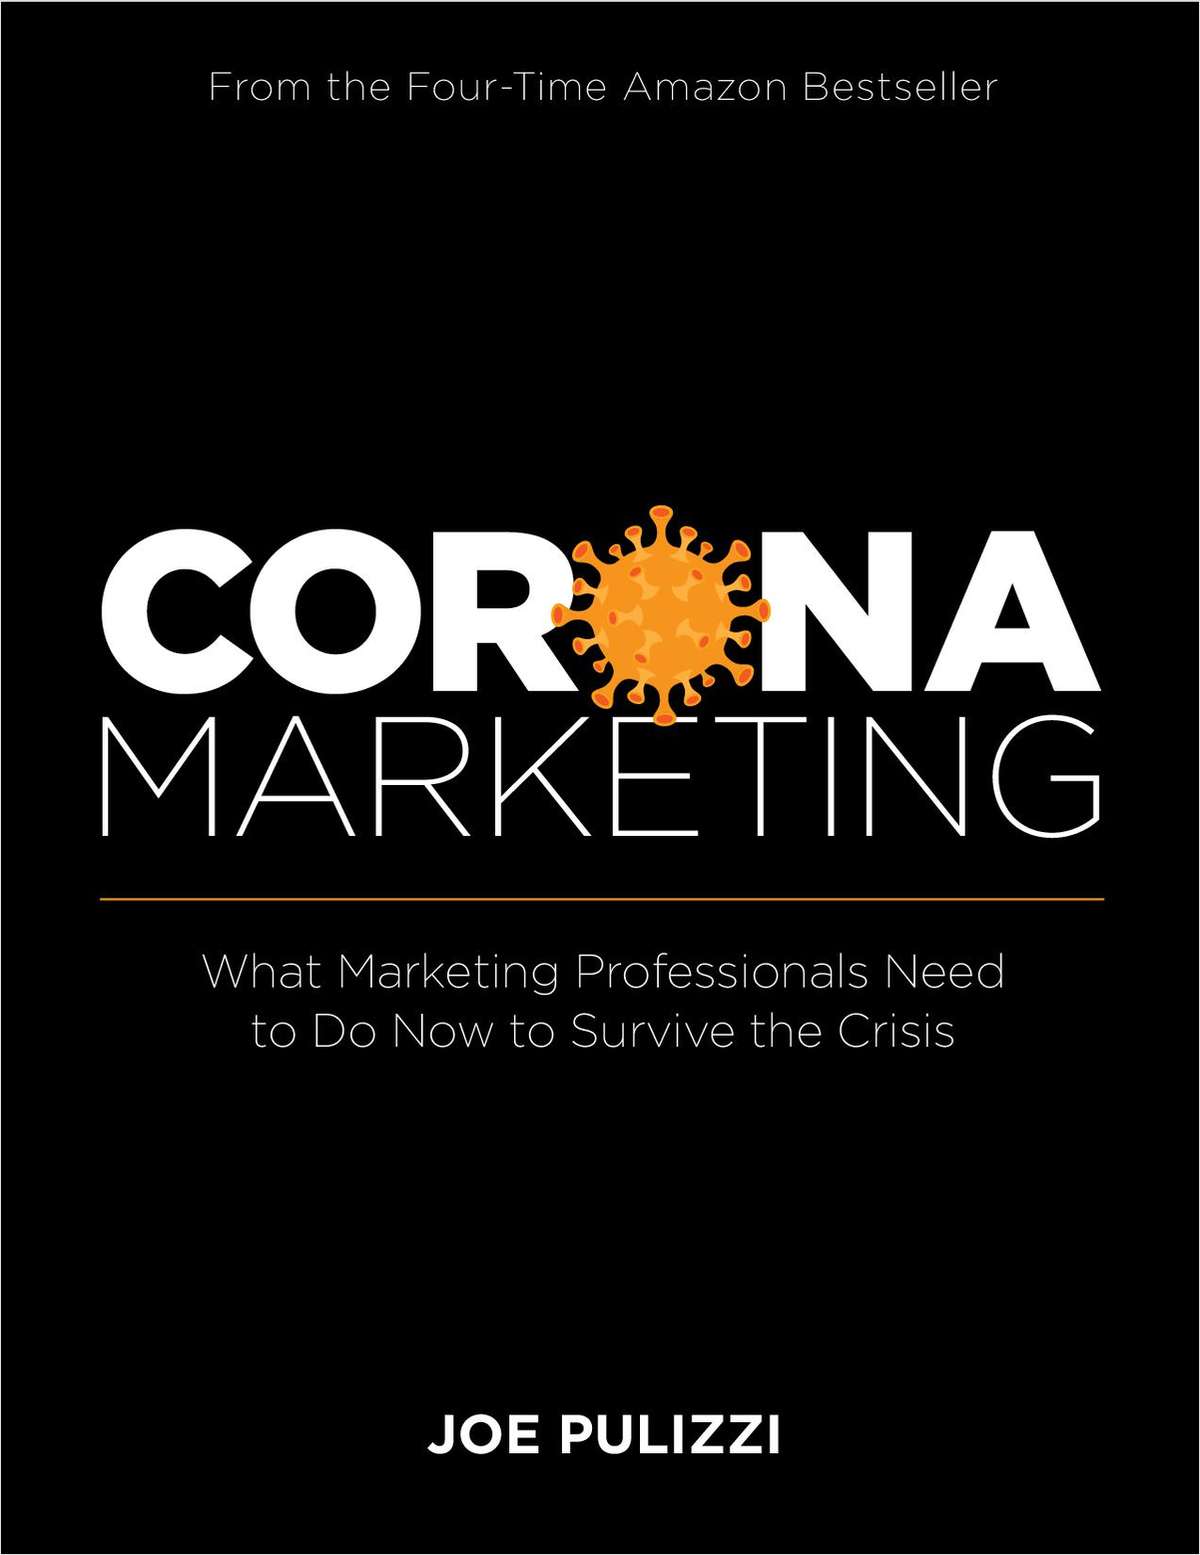 Corona Marketing- Free Guide on How Marketers Will Survive the Pandemic